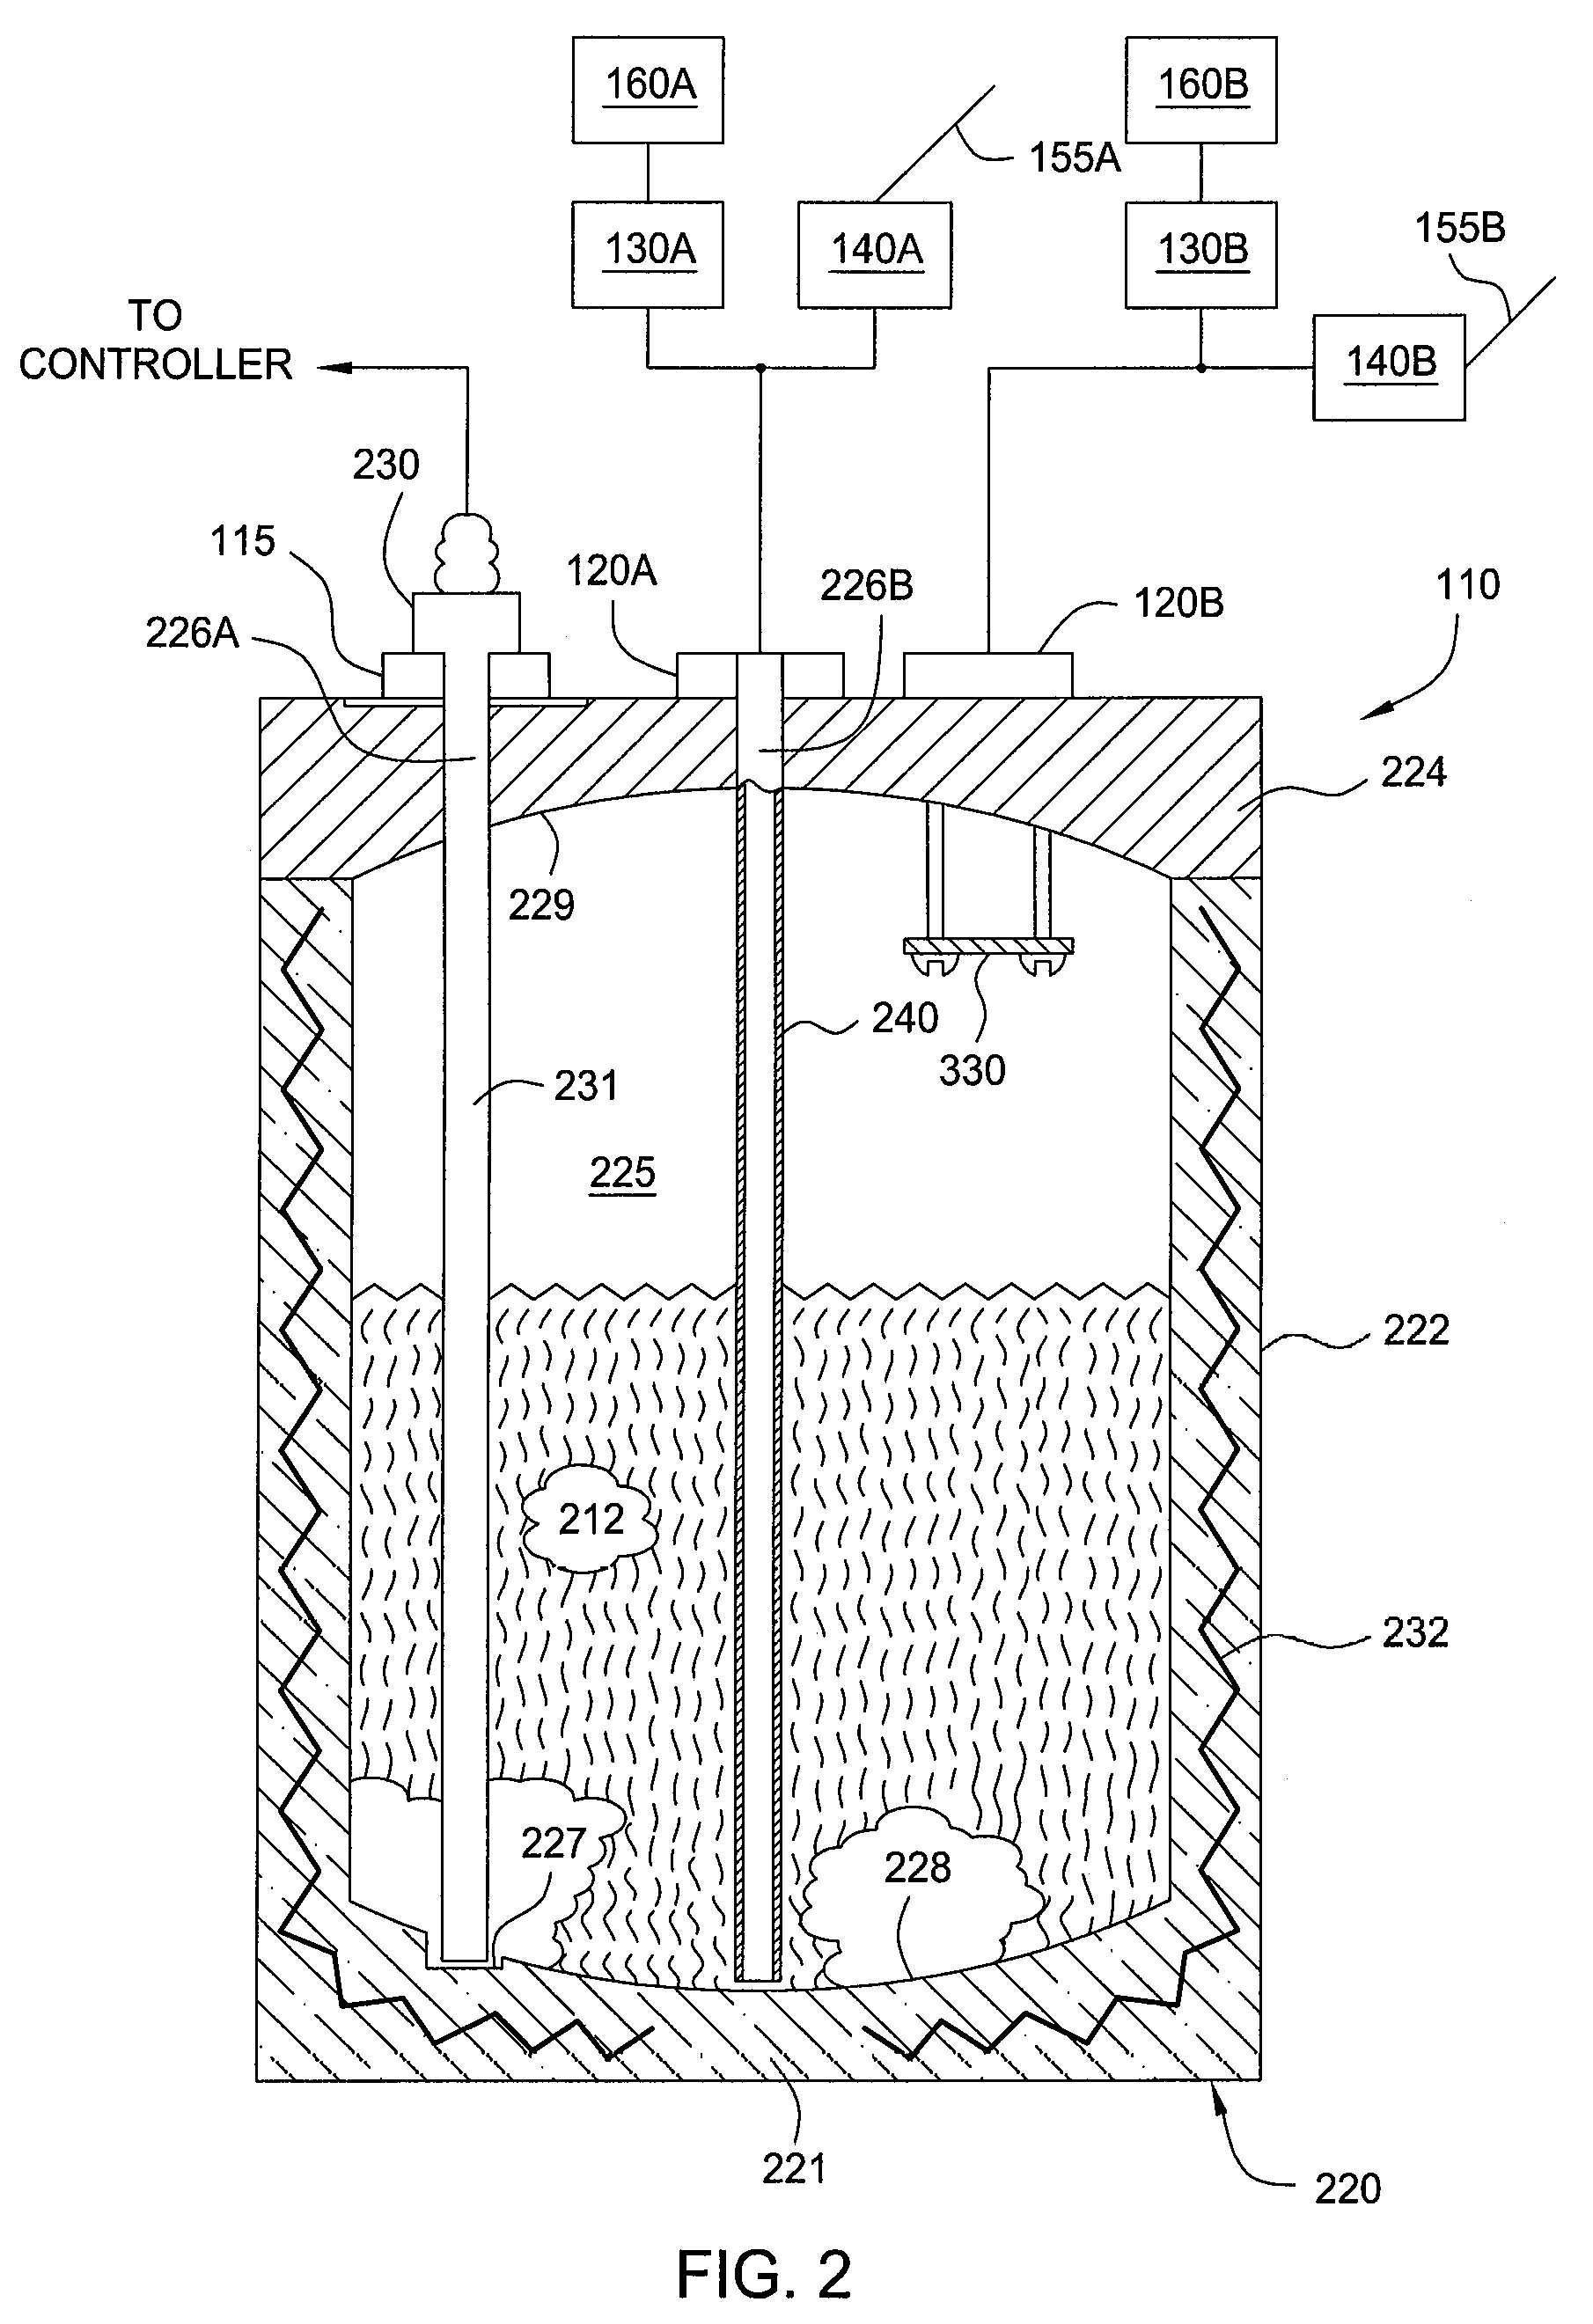 Ampoule for liquid draw and vapor draw with a continuous level sensor